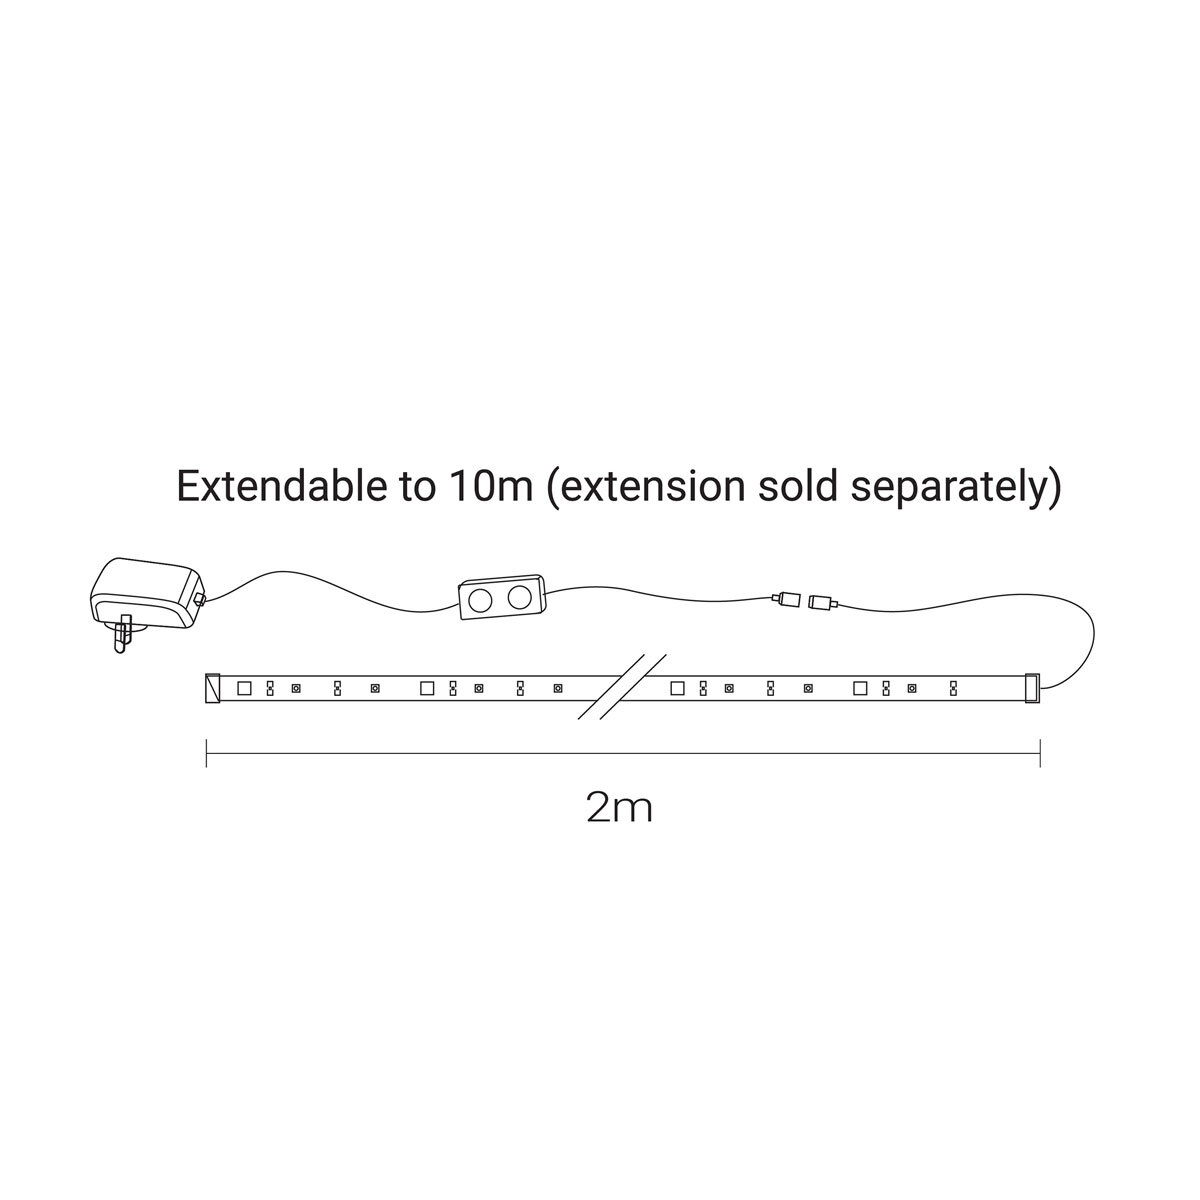 Line drawing of light strip with dimensions